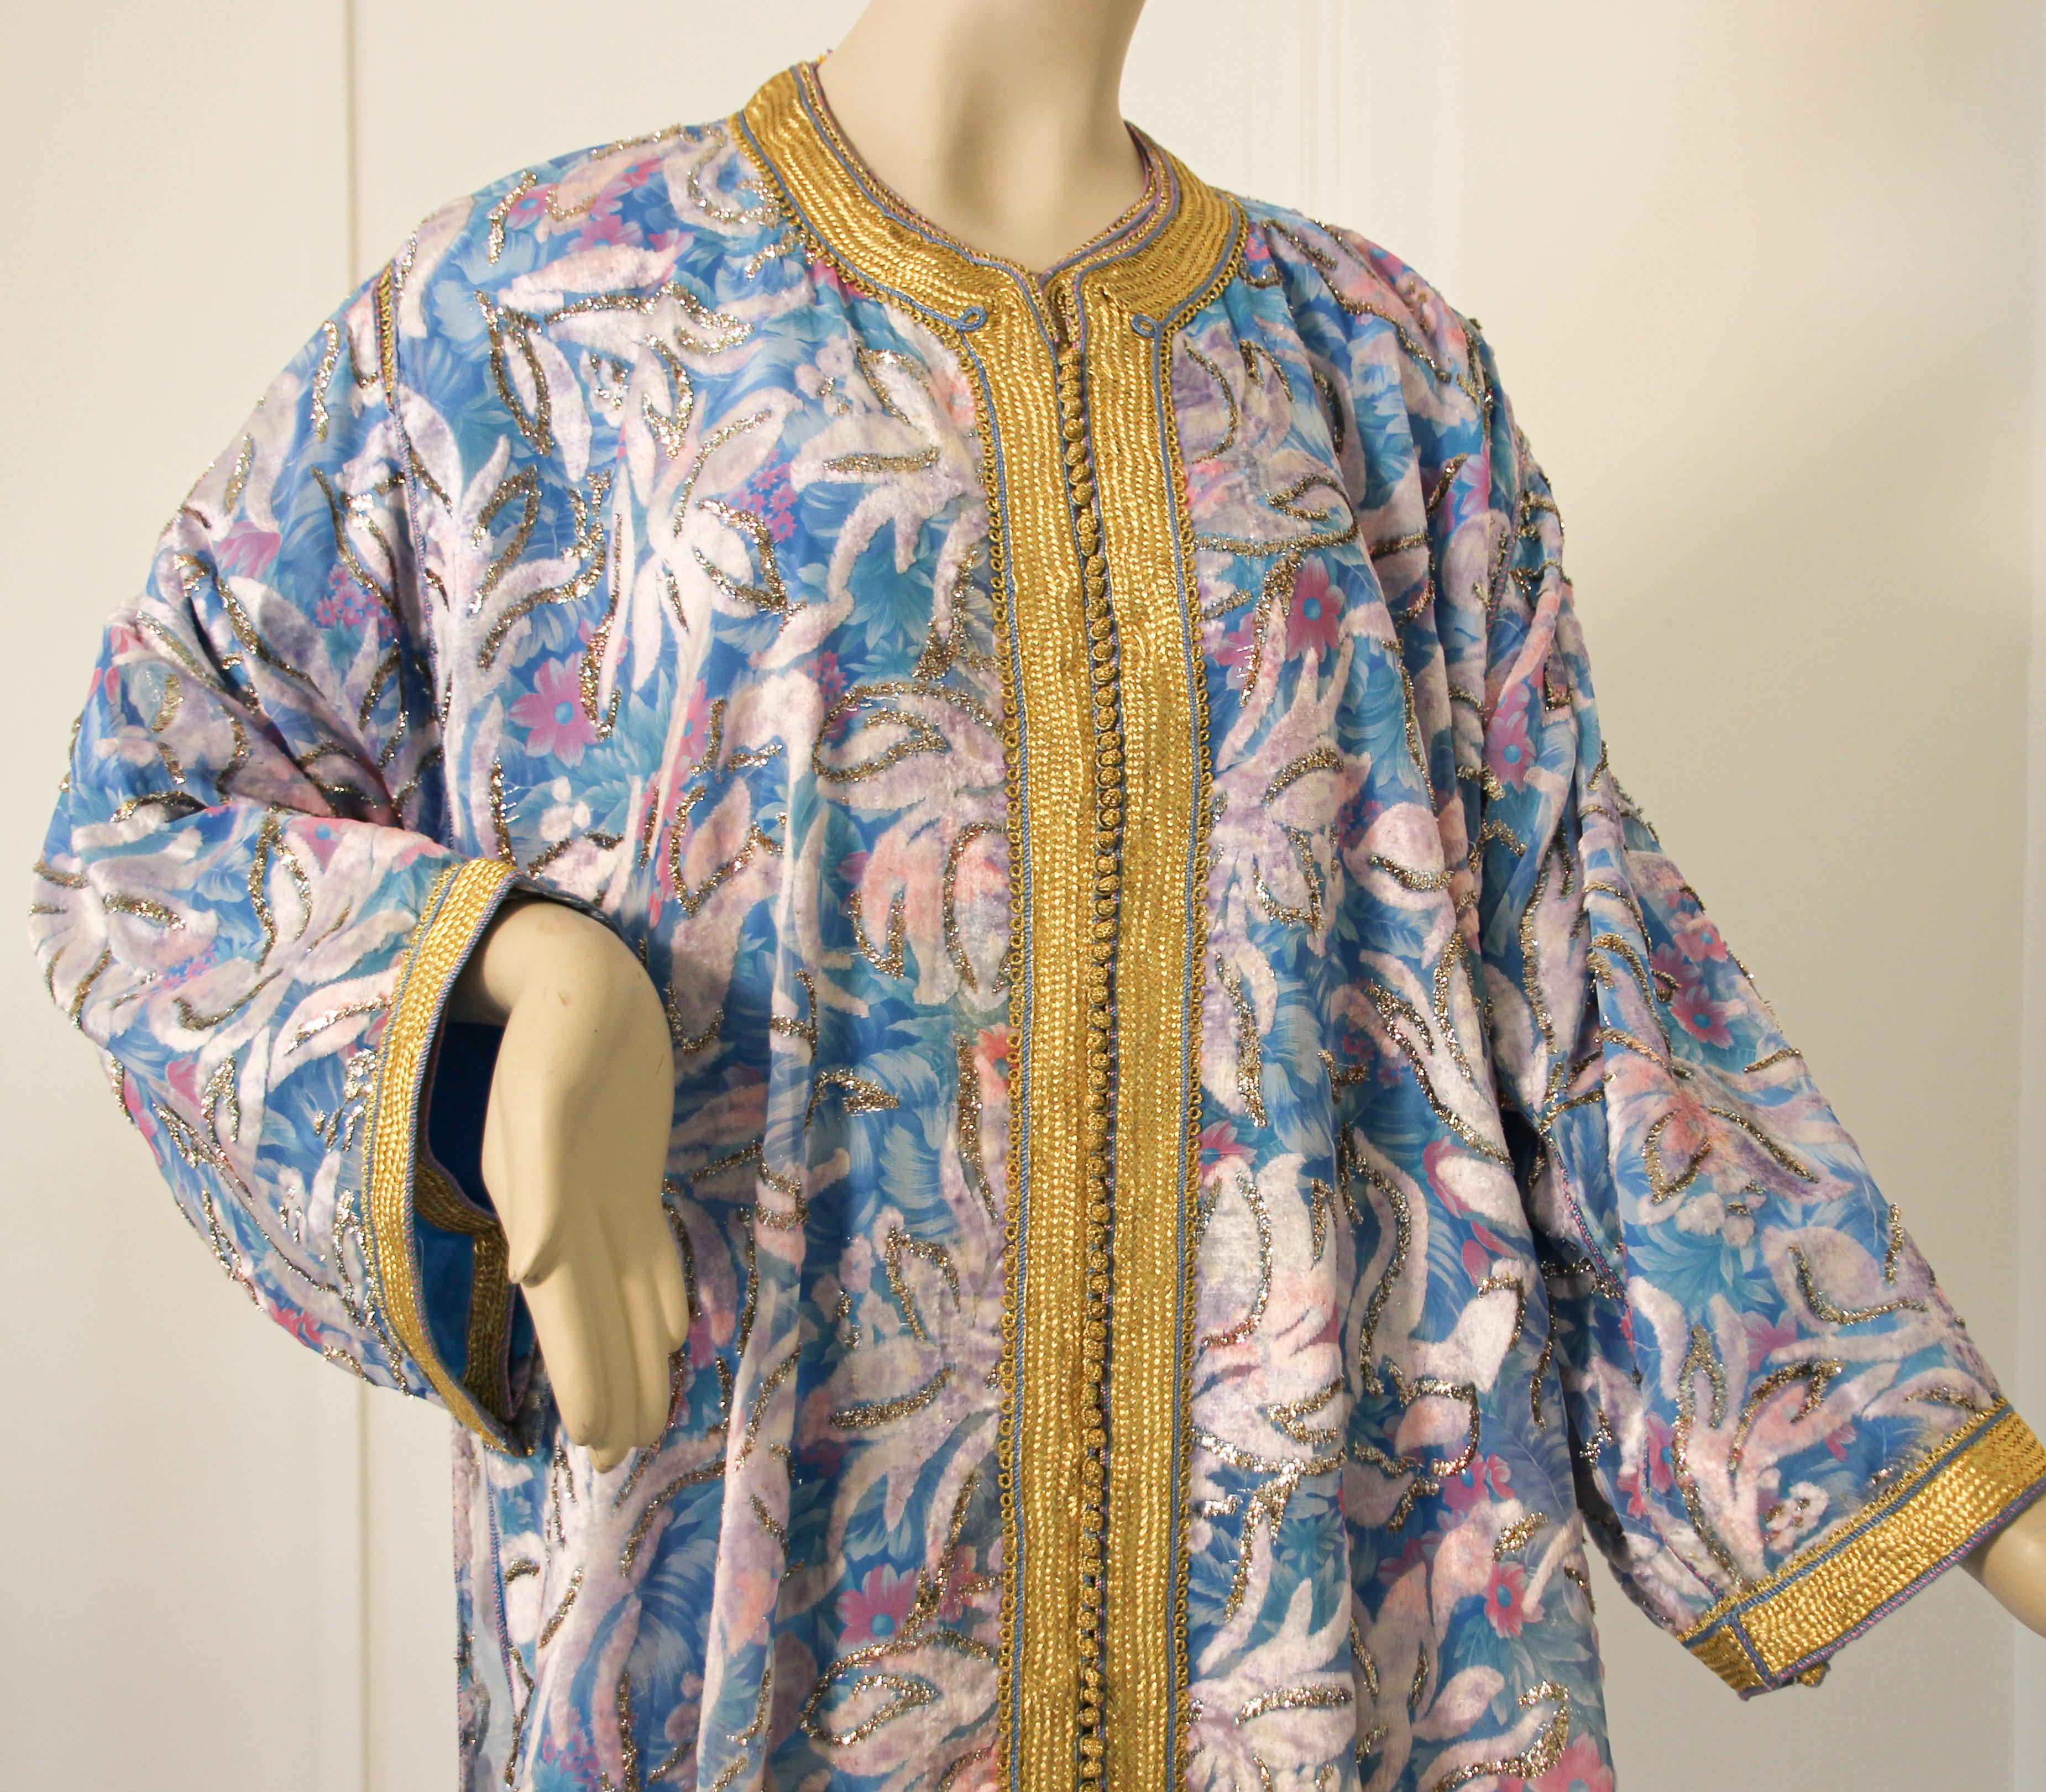 20th Century Moroccan Kaftan in Turquoise and Gold Floral Brocade Metallic Lame For Sale